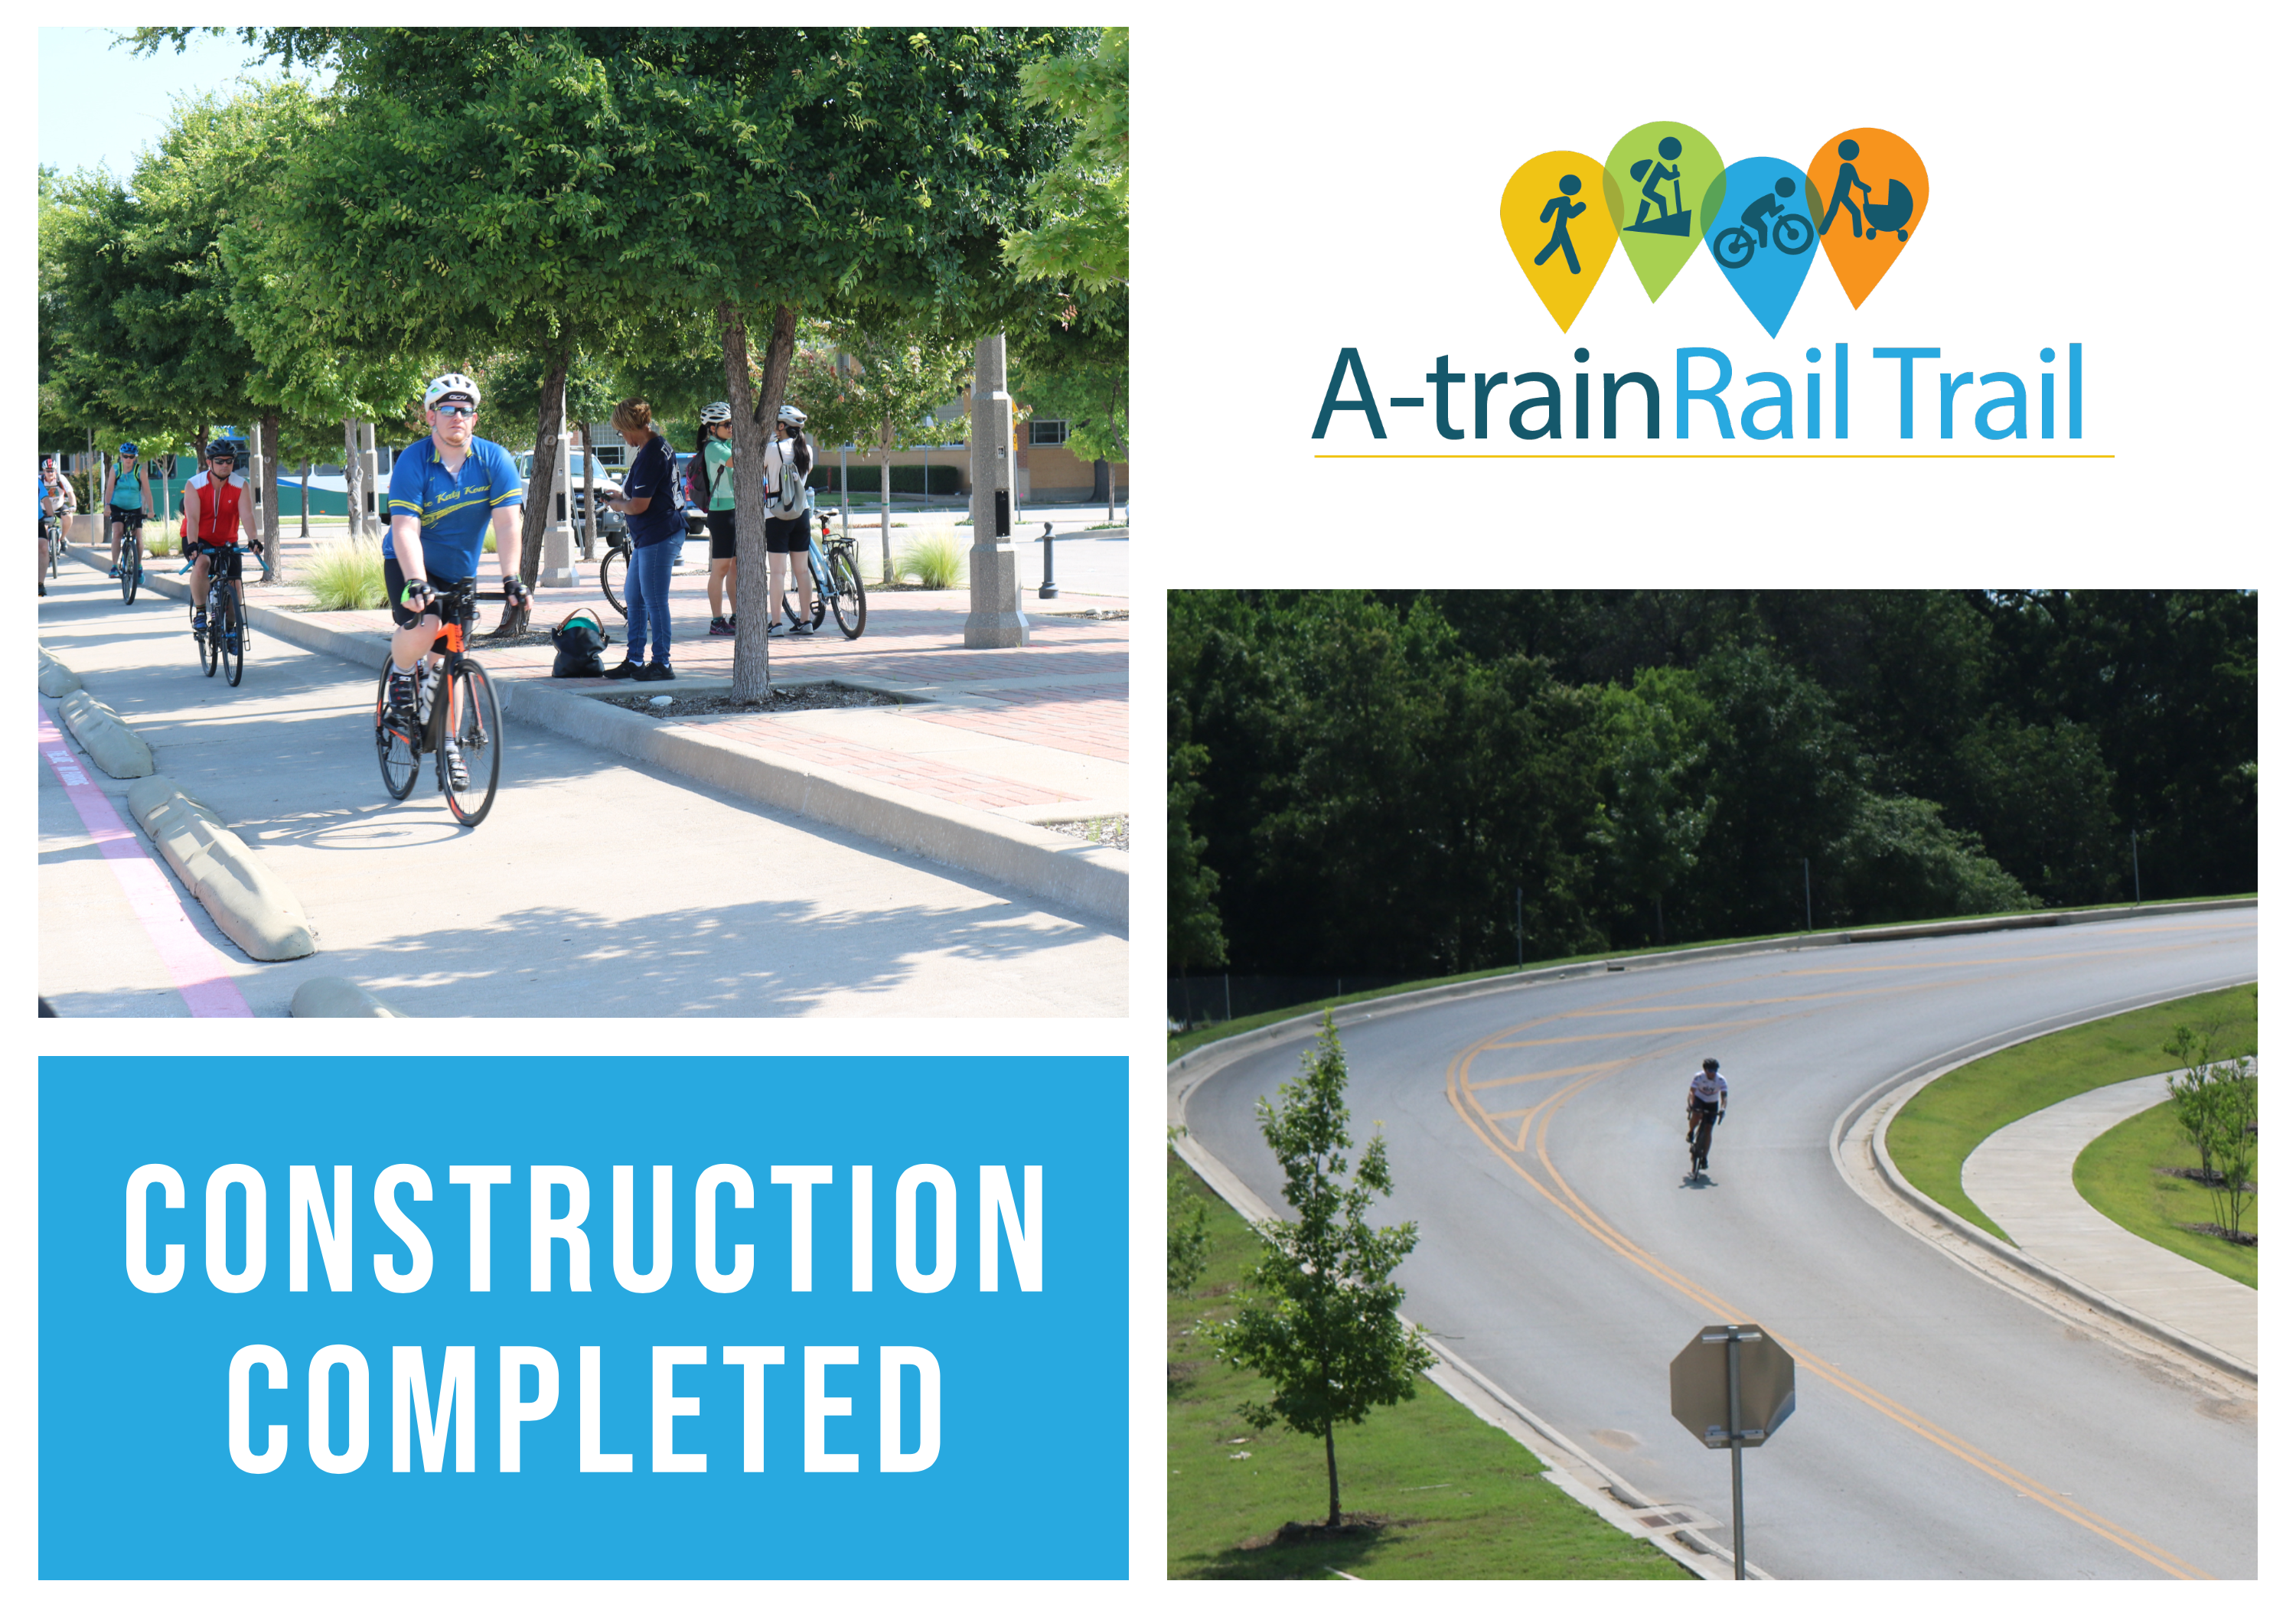 Celebrate with DCTA: The A-train Rail Trail is Complete